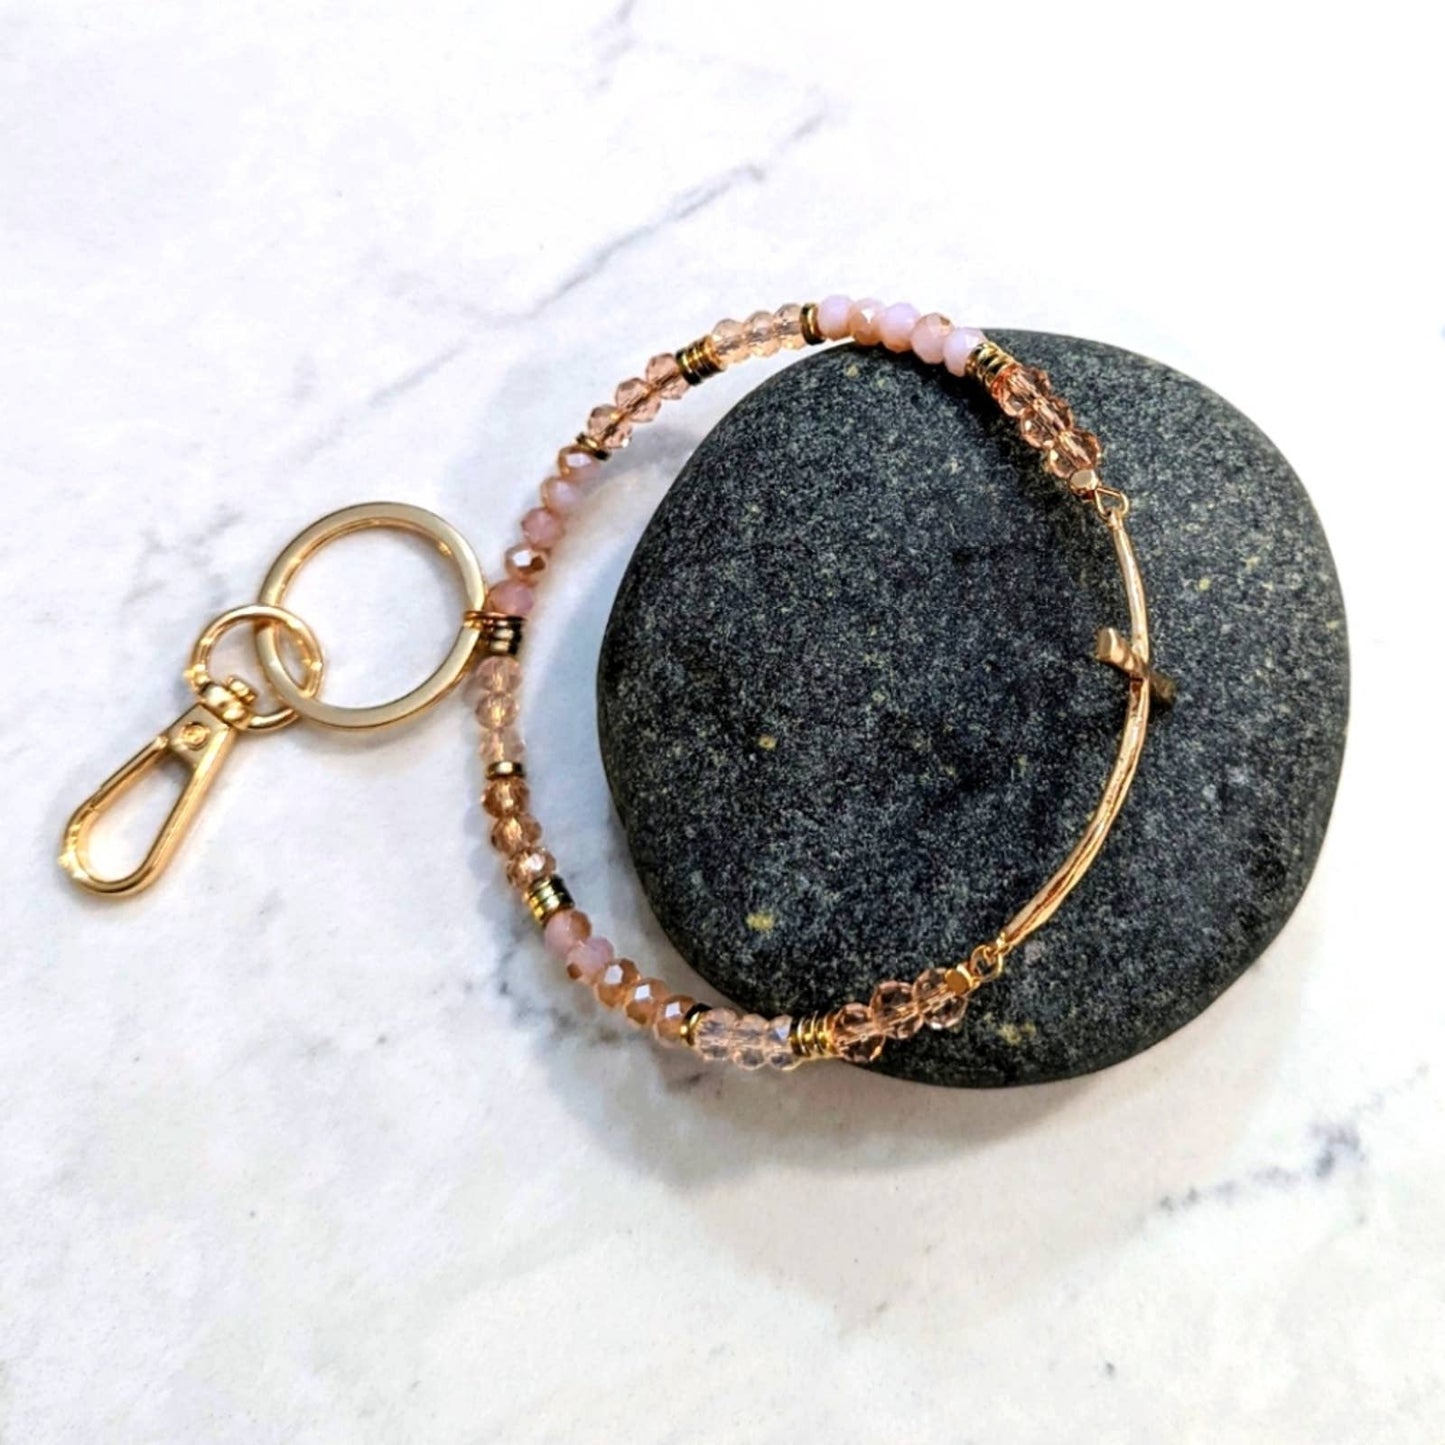 GOLD TONE CROSS Pink Glass Bead Bracelet Style Hoop Key Chain with Closed Hook